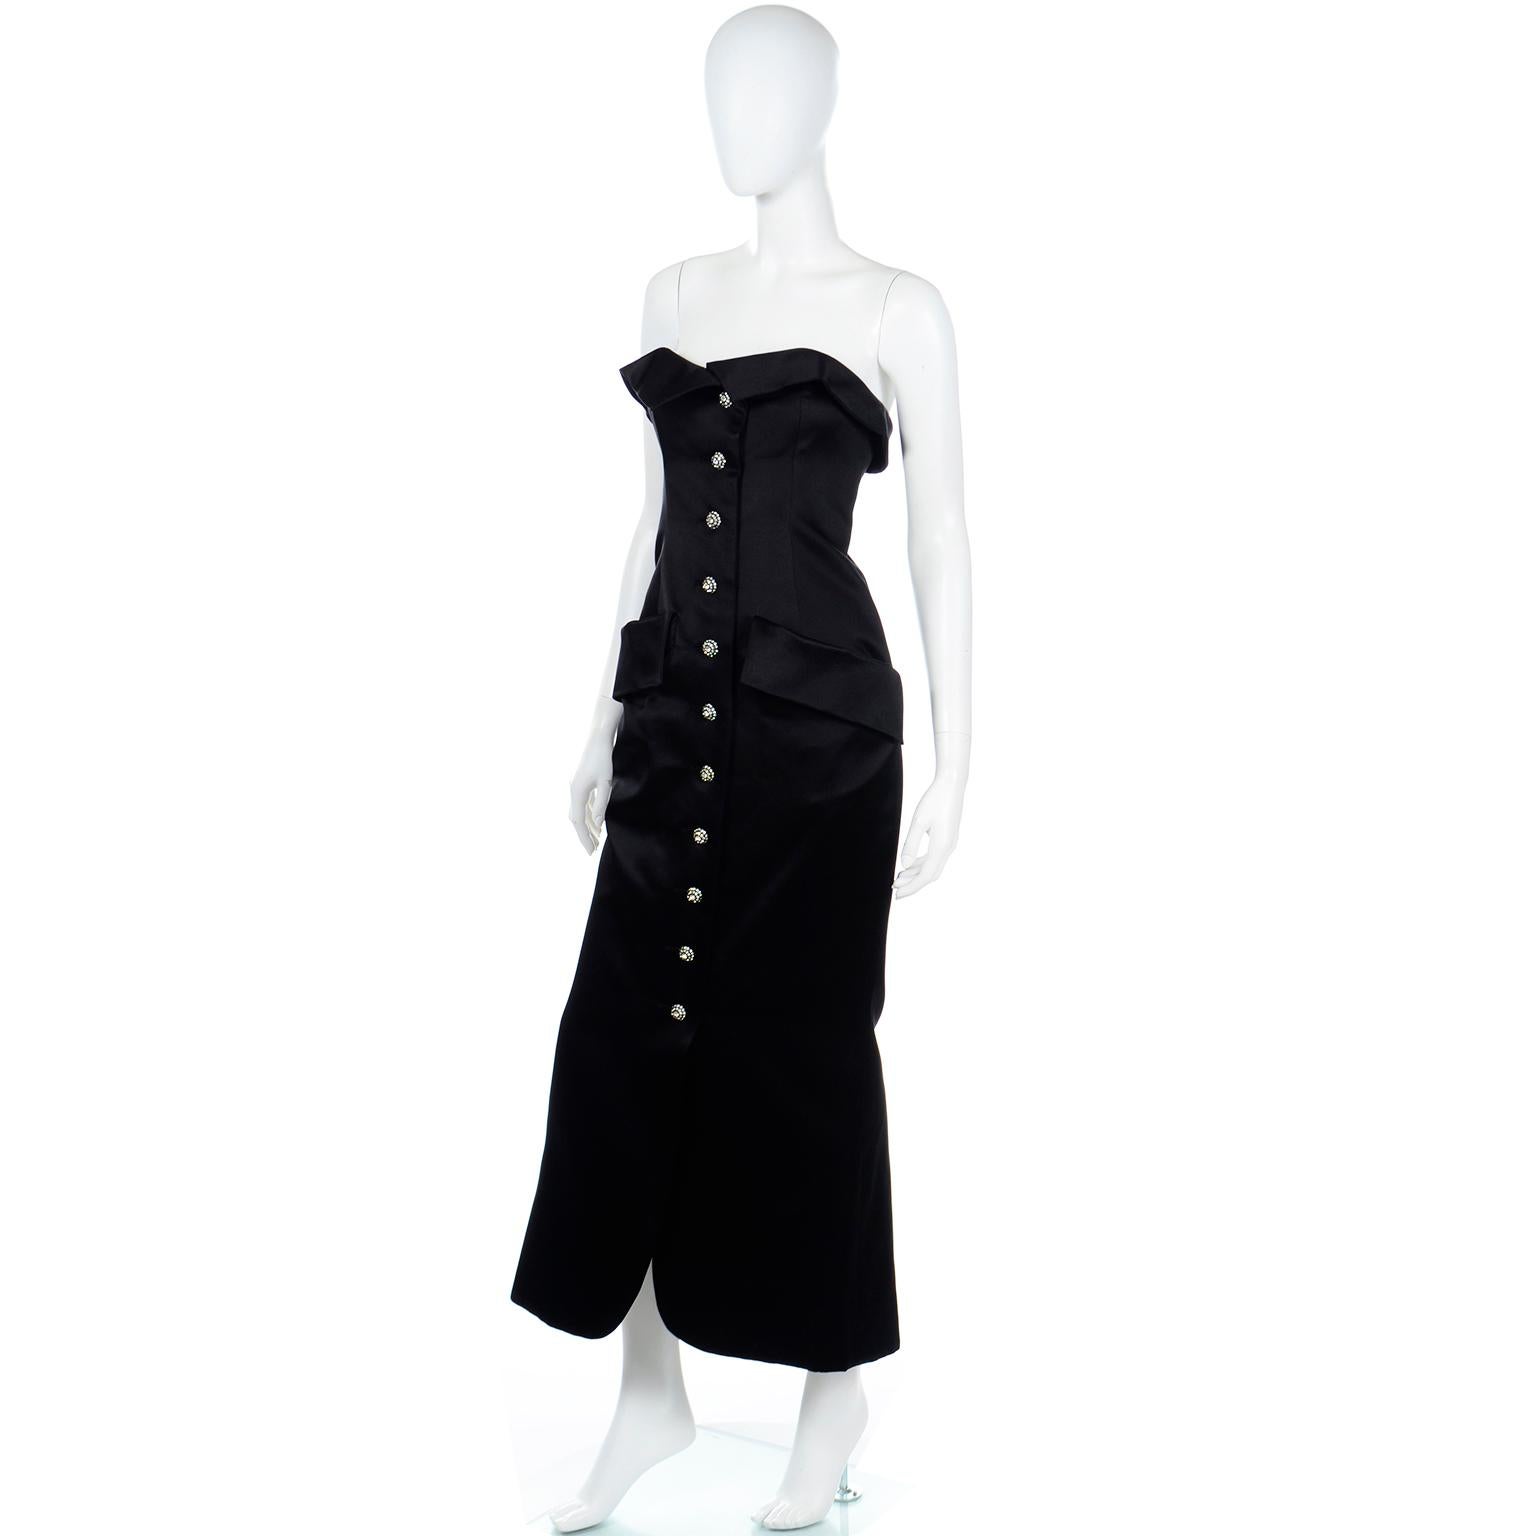 Yves Saint Laurent 1985 Vintage Black Strapless Runway Evening Gown In Excellent Condition For Sale In Portland, OR